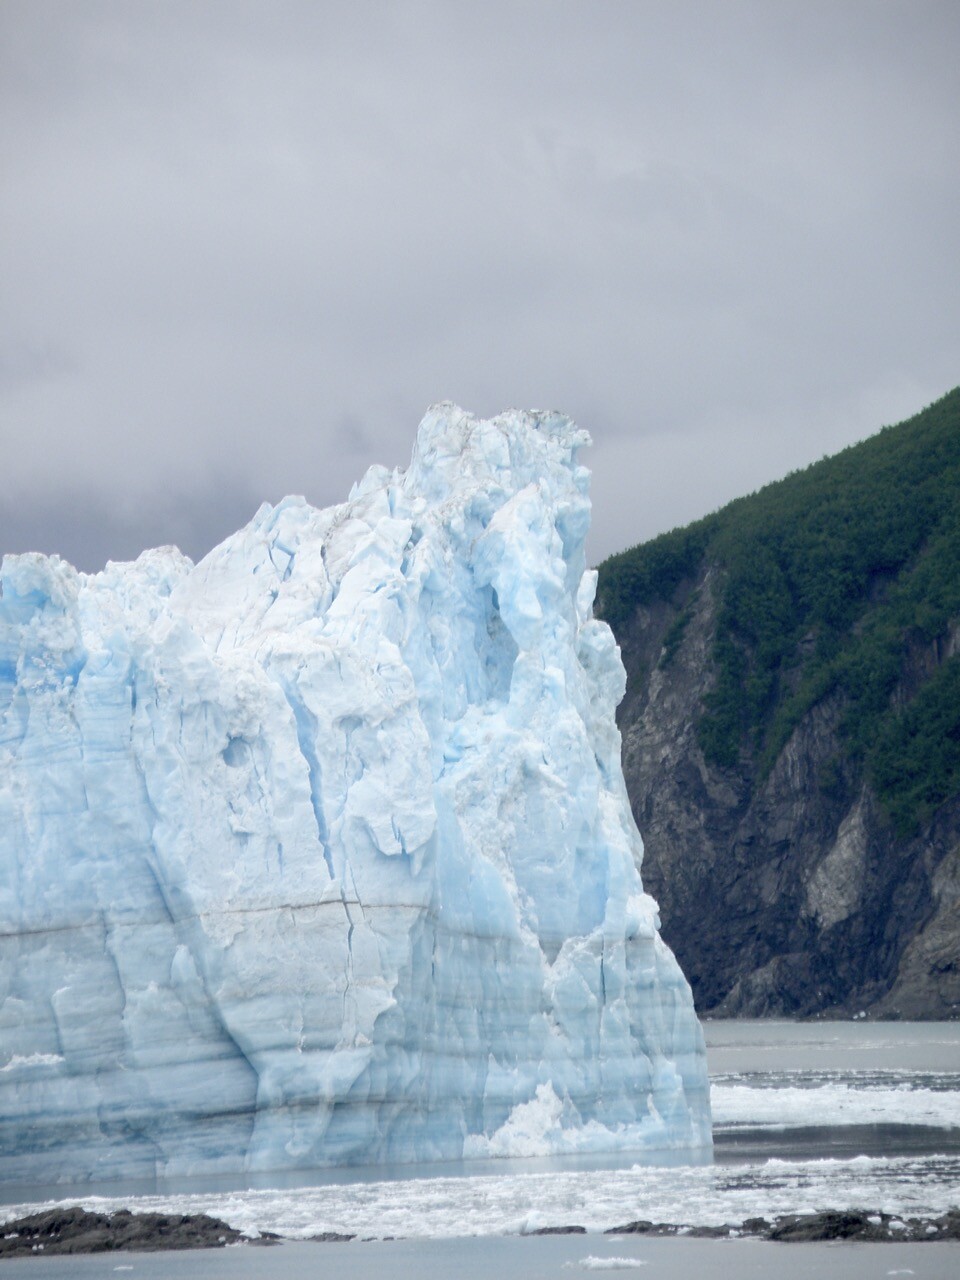 An iceberg, contrasted against a stony cliff.